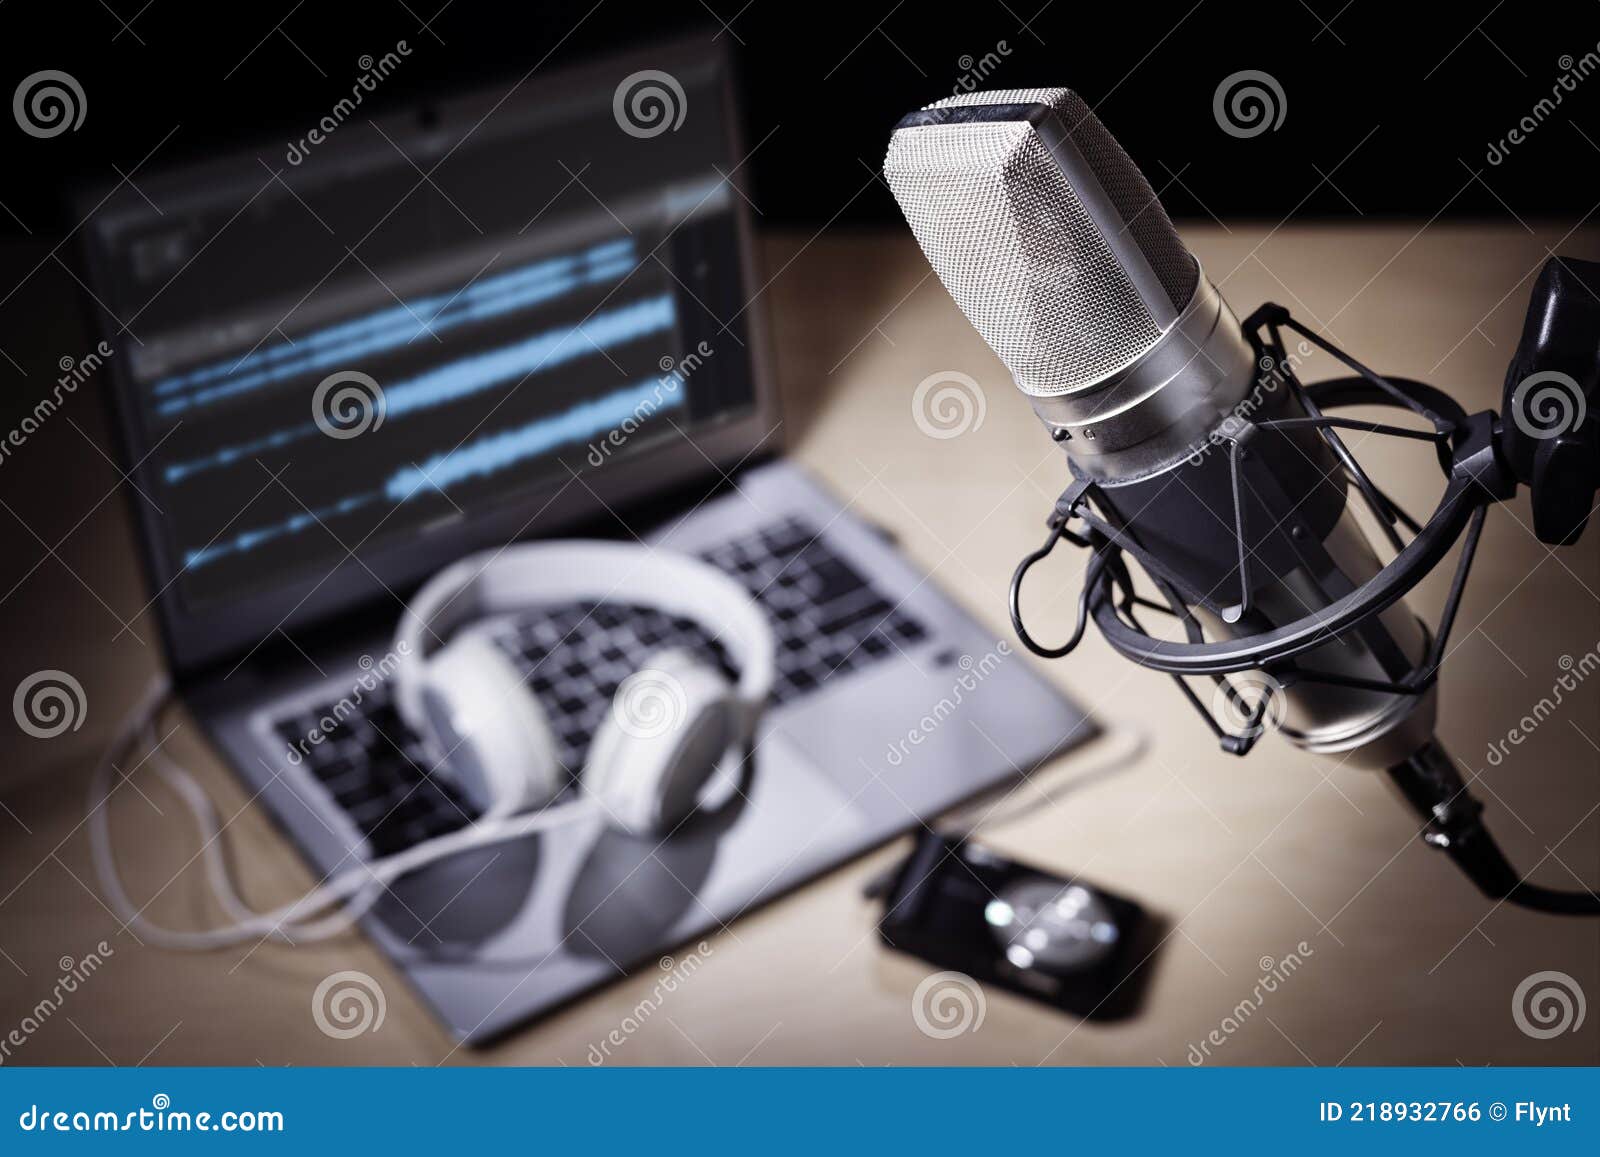 podcast microphone and laptop computer in recording studio